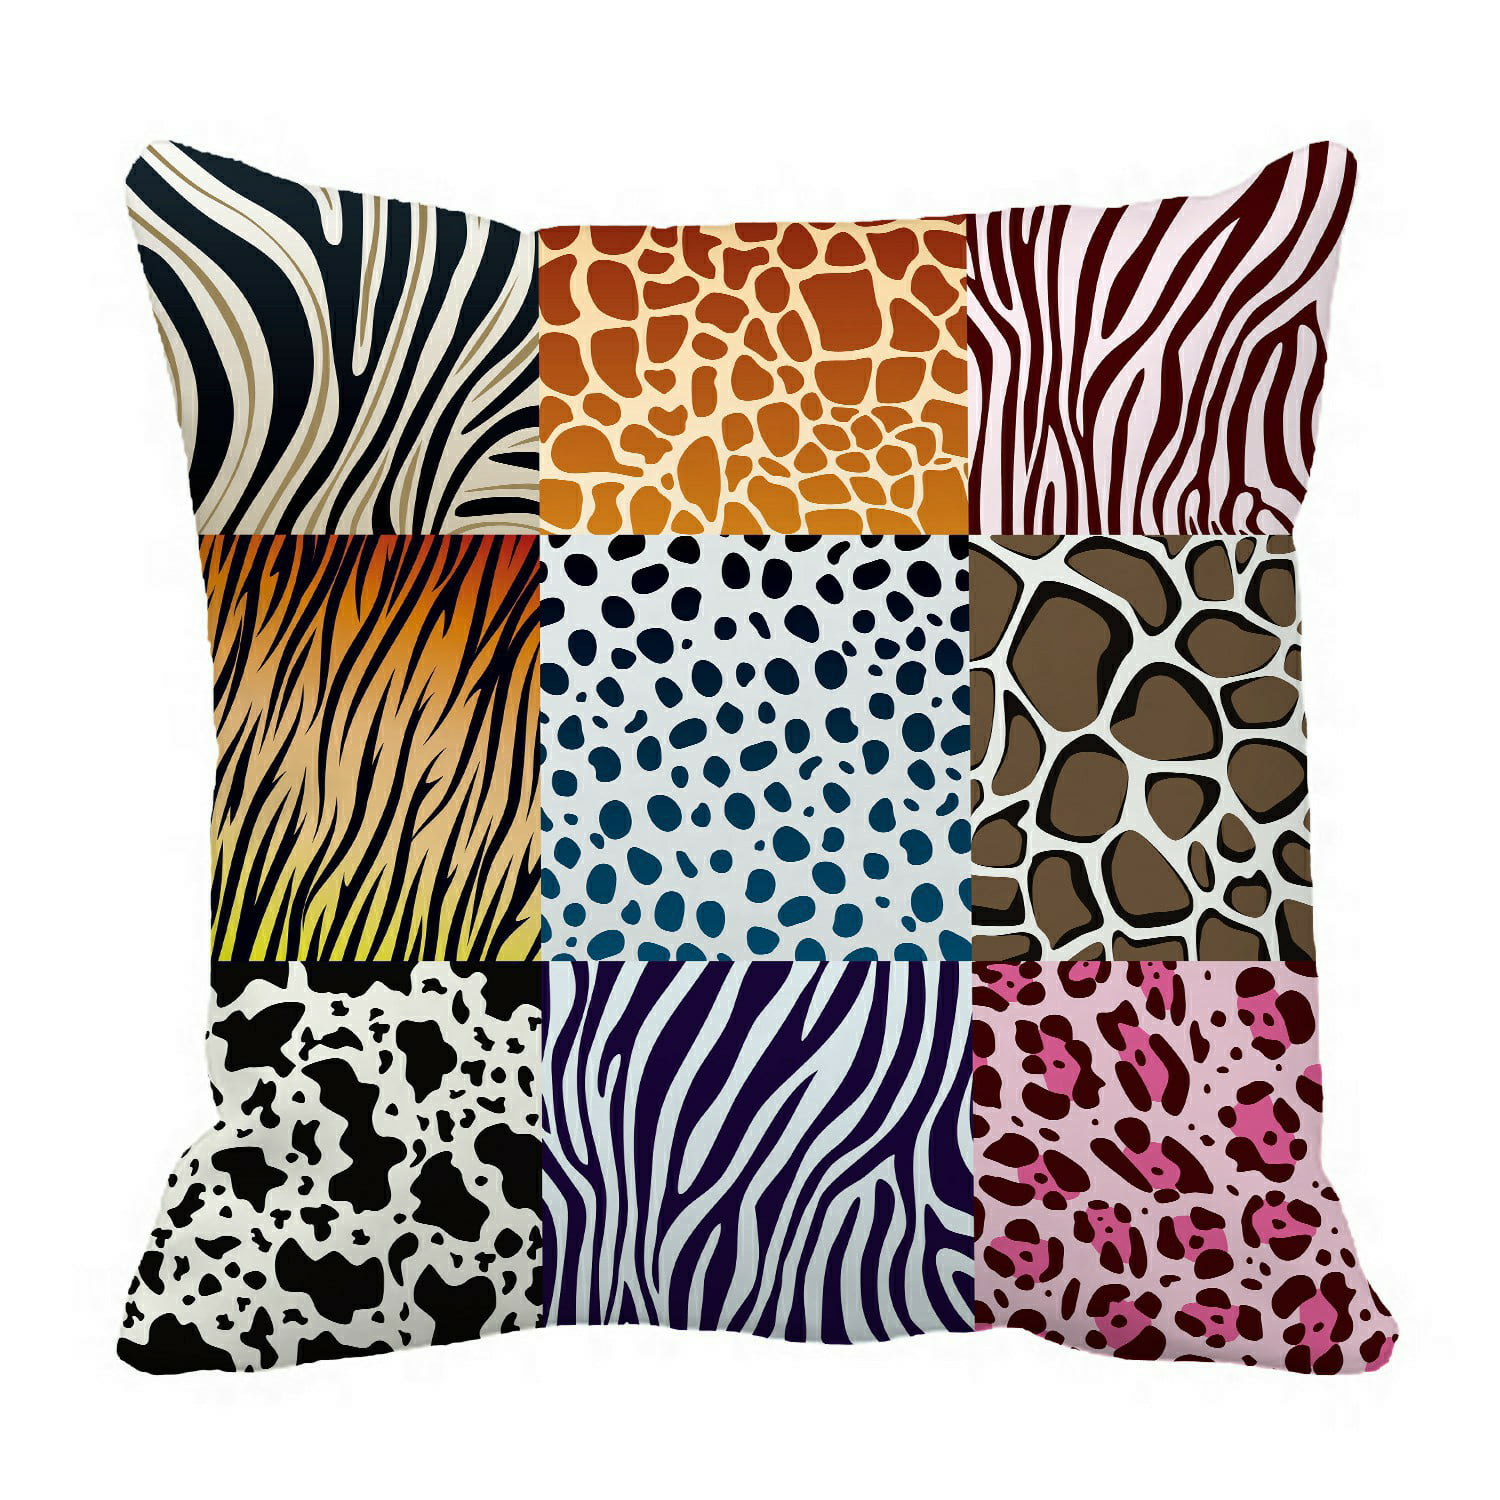 Soft Animal Print Zebra Leopard Polyester Deco Throw Pillow Case Cushion Cover 